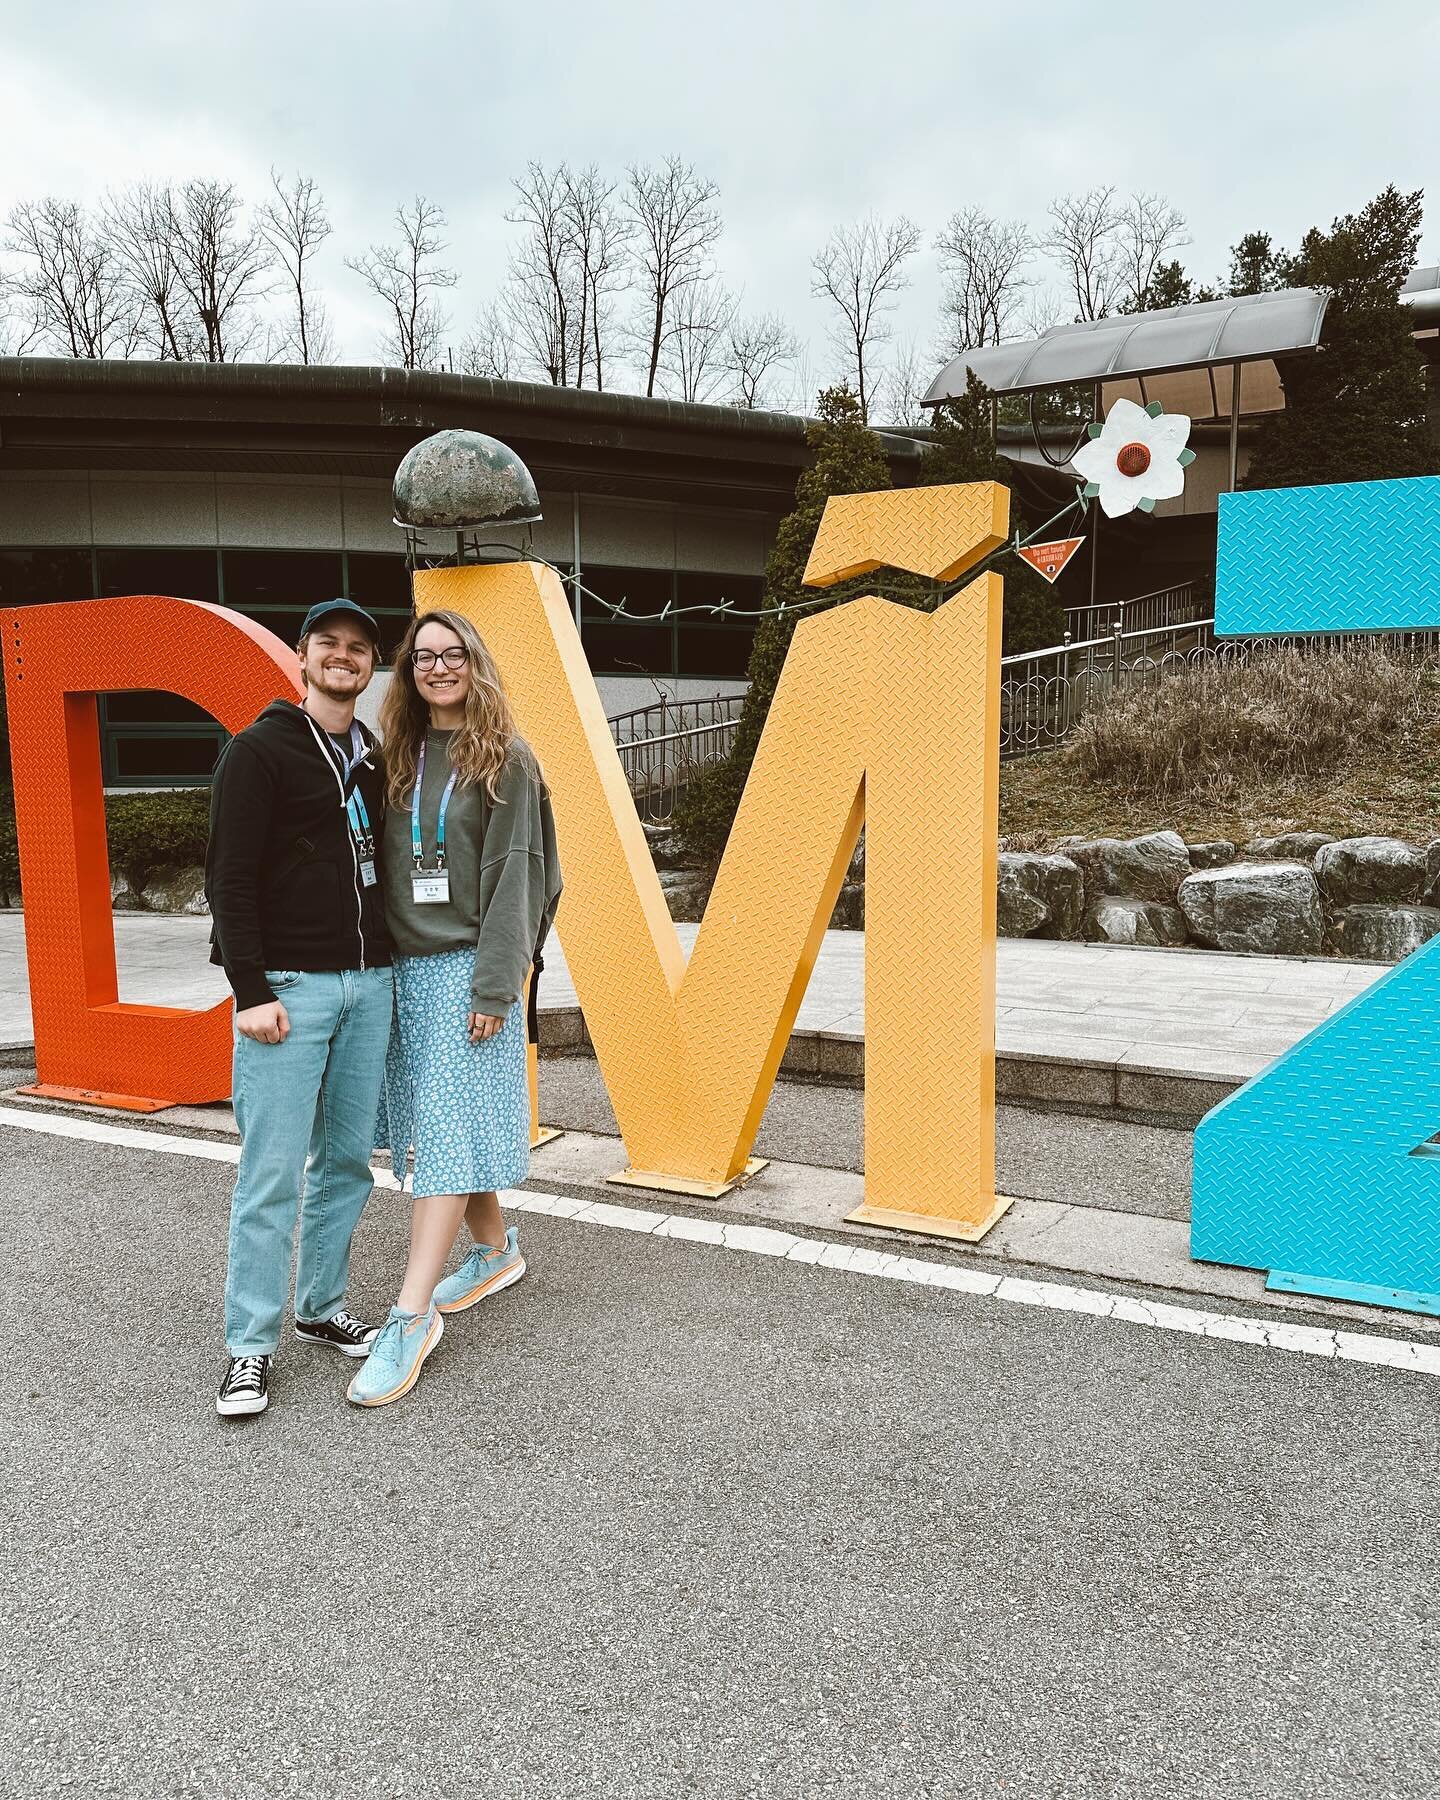 The Korean government organizes tours to the DMZ to educate tourists on the history of the Korean War&hellip; and to sell soybean chocolate 🍫 

The DMZ, or the demilitarized zone that separates North and South Korea, apparently has amazing soil &mda